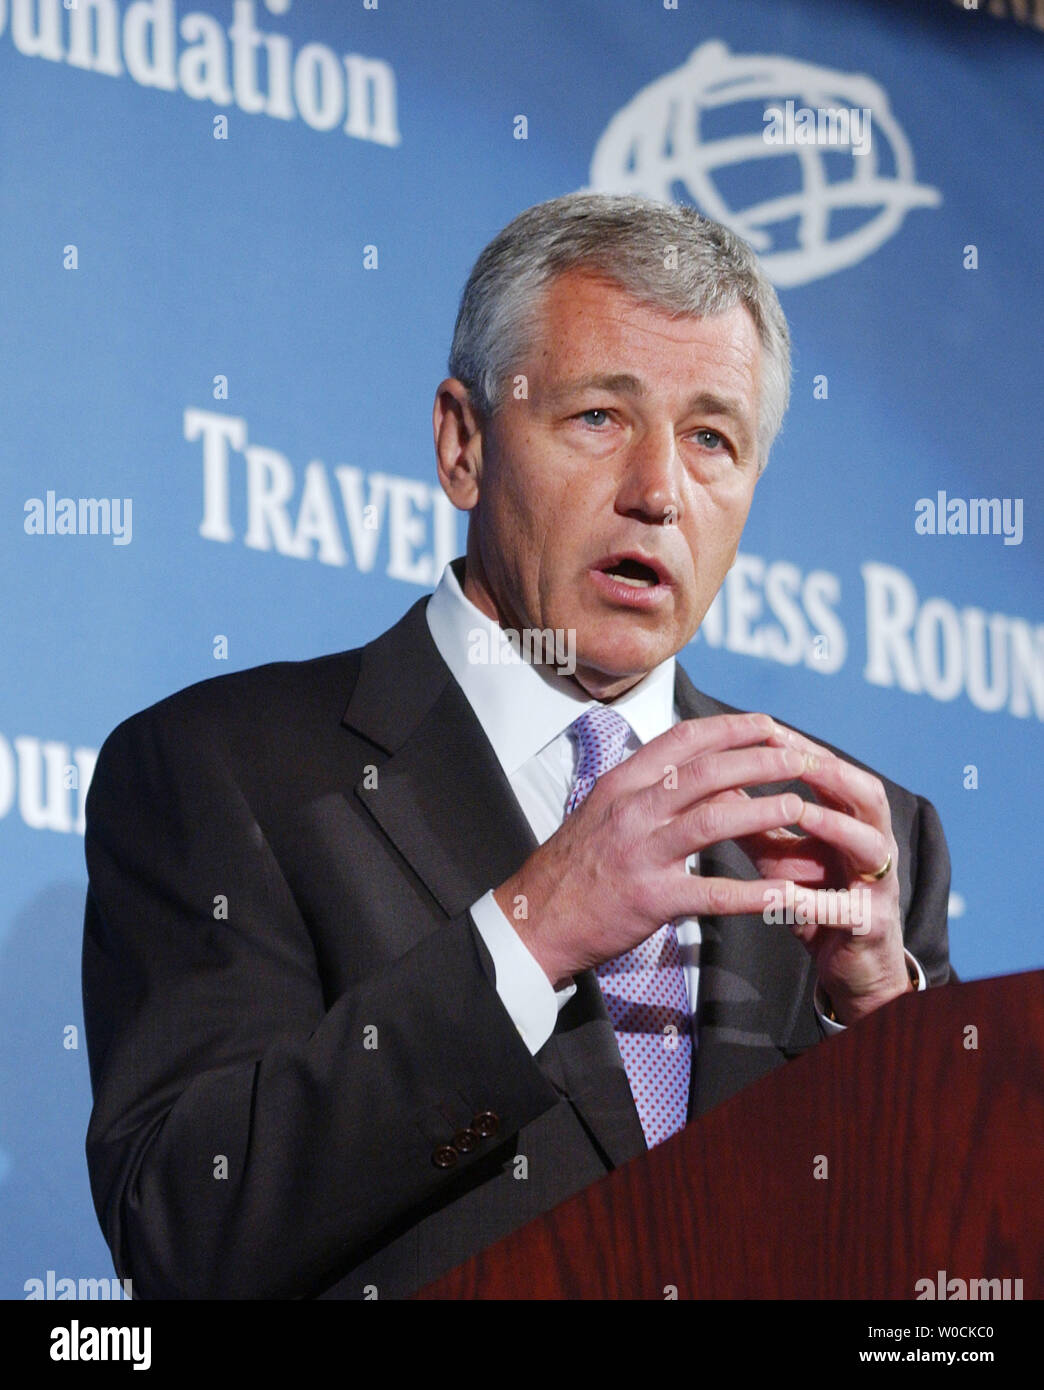 Sen. Chuck Hagel, R-Neb, speaks to those gathered at the U.S. Chamber of Commerce for its 3rd Annual Travel and Tourism Summit, 'Redefining America at Home and Abroad' on April 20, 2005 in Washington.  Hagel called for further investigation into President Bush's nominee for U.N. ambassador John Bolton at yesterdays Senate hearing.  (UPI Photo/Michael Kleinfeld) Stock Photo